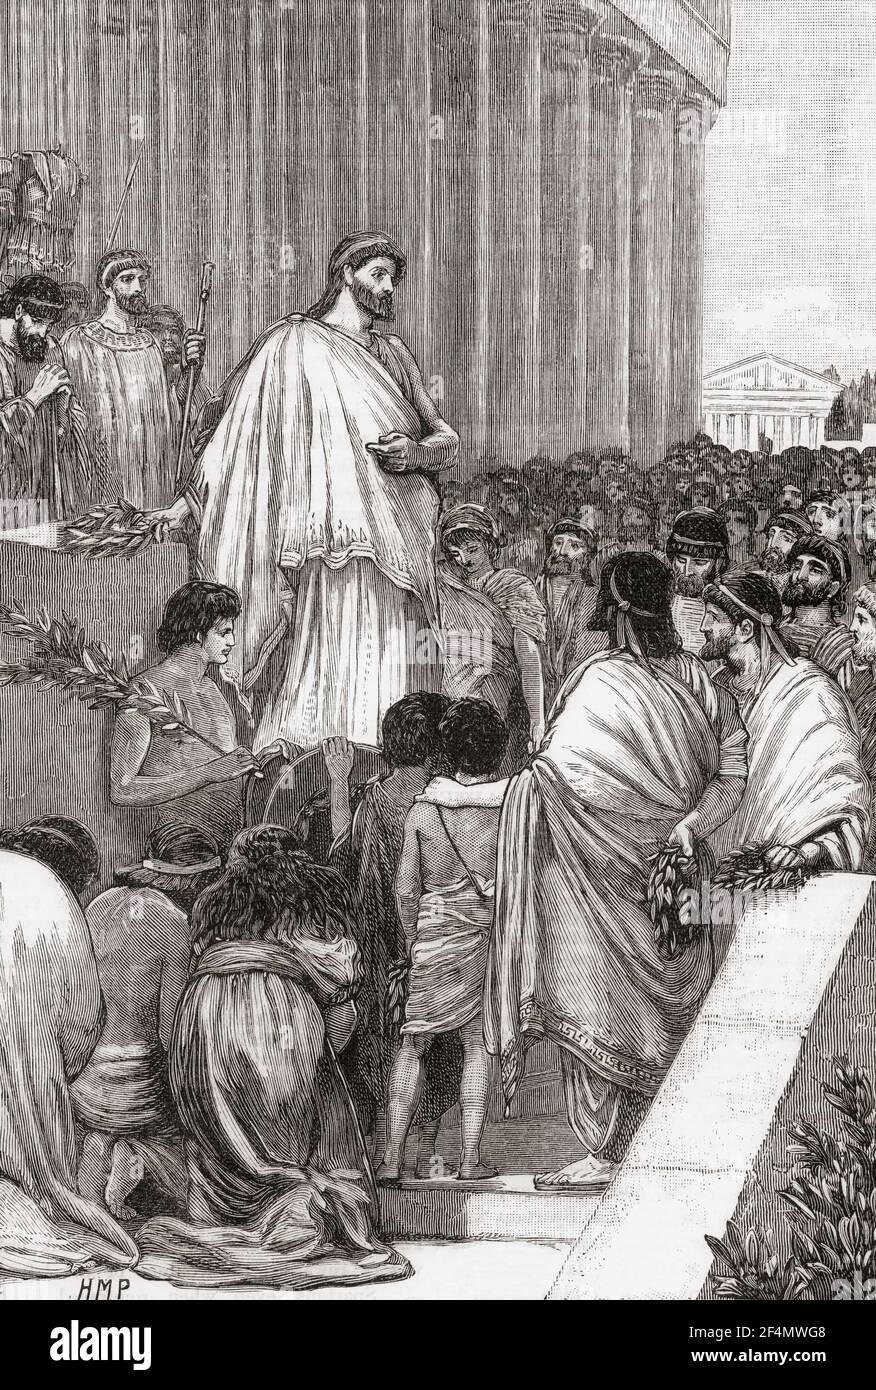 Pericles delivering his funeral oration in honour of the   Athenians who died for their city. Pericles, c. 495 – 429 BC.  Prominent and influential Greek statesman, orator and general of Athens. From Cassell's Universal History, published 1888. Stock Photo